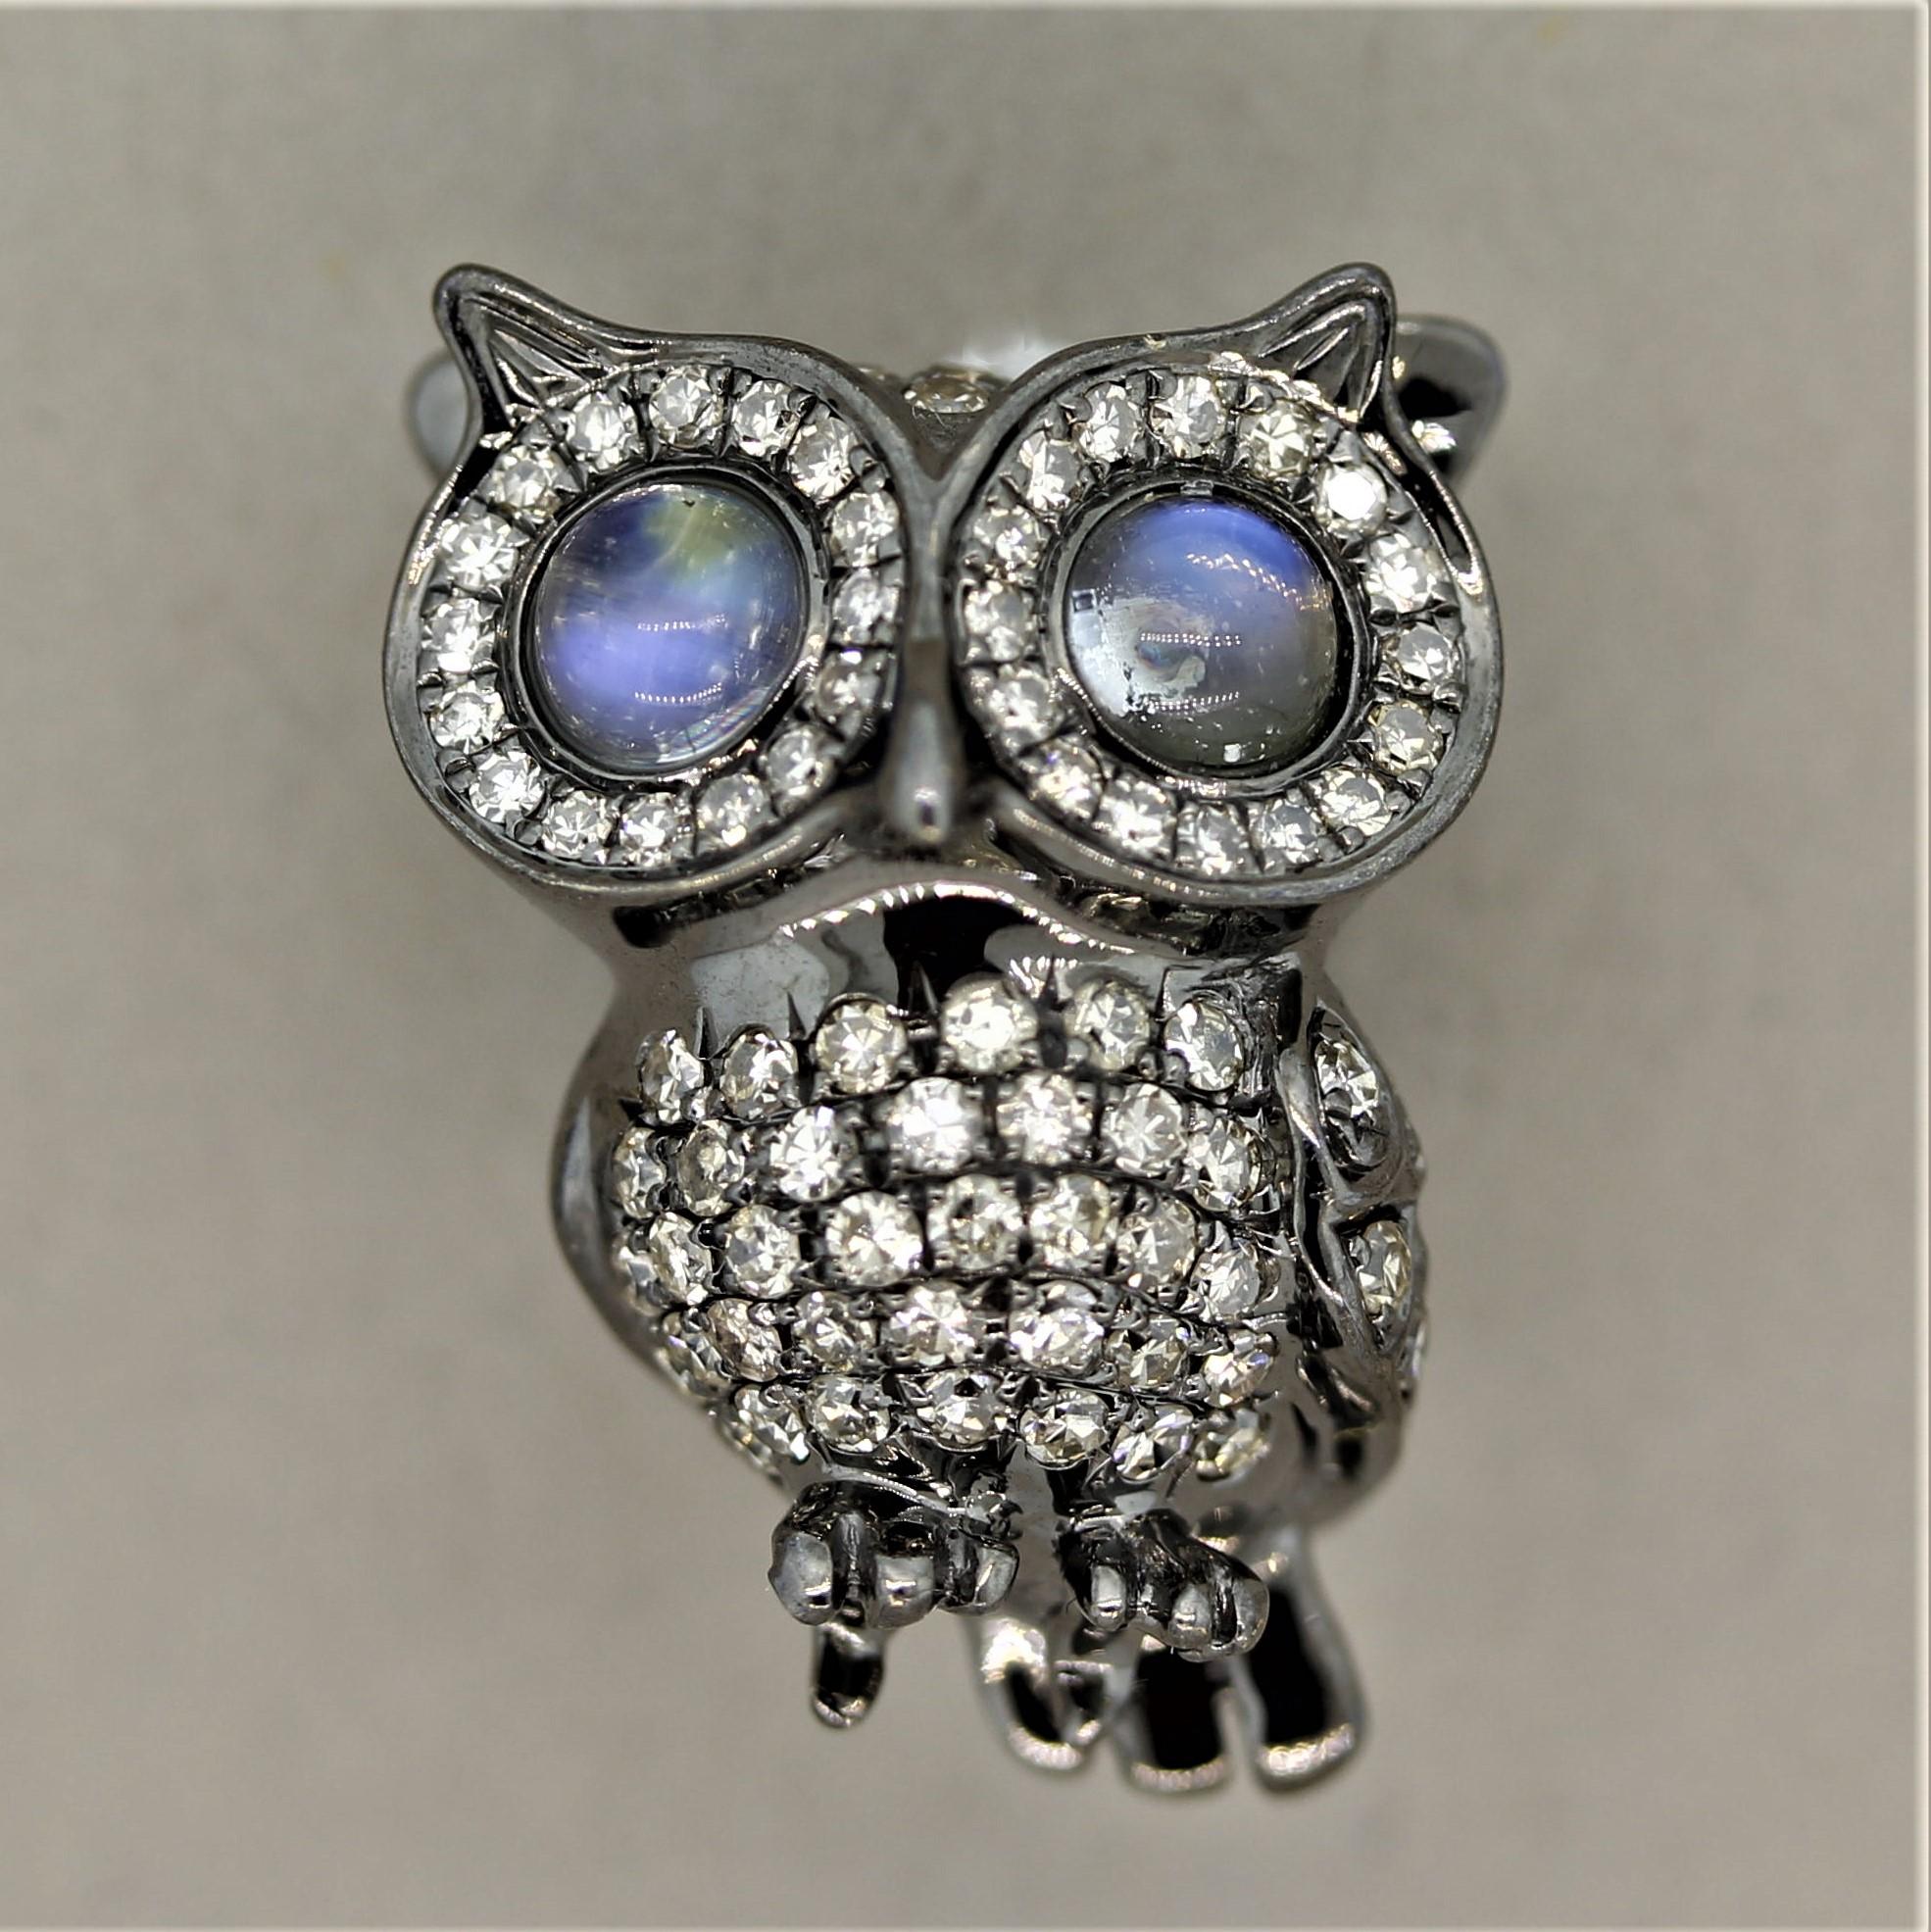 A cute little owl ready to come along on your next outfit. The little guy measures close to an inch long and is covered in 0.67 carats of round brilliant cut diamonds. It has 2 big eyes which are made of moonstones weighing 0.54 carats. Made in 18k